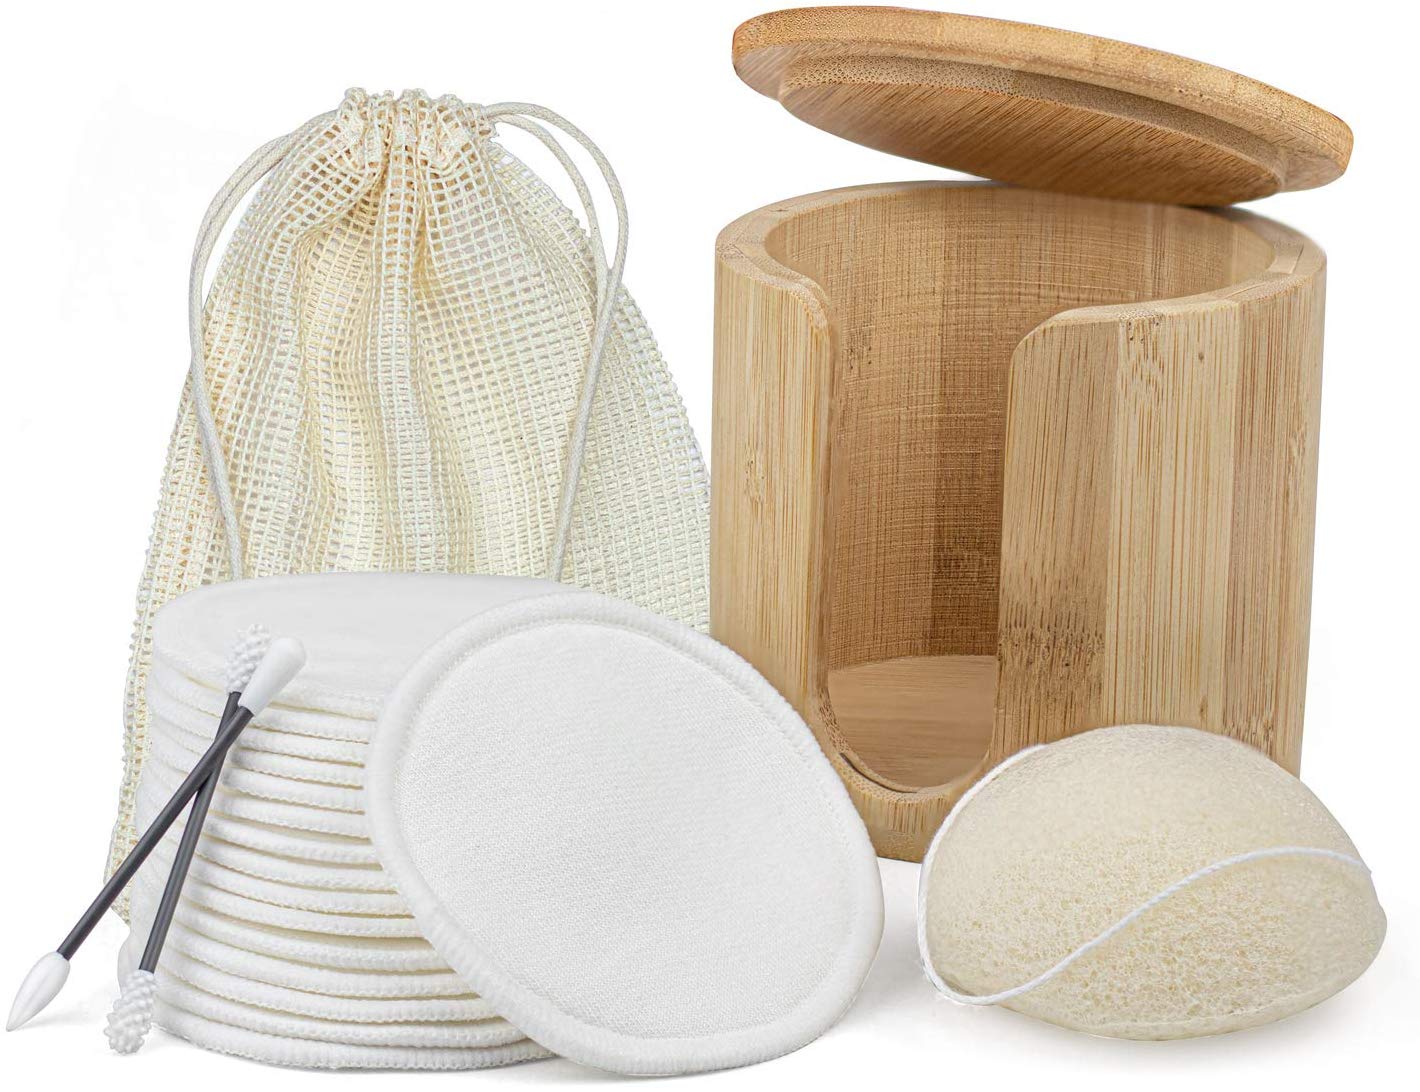 Adbra reusable cotton pads with net bag and wooden storage jar